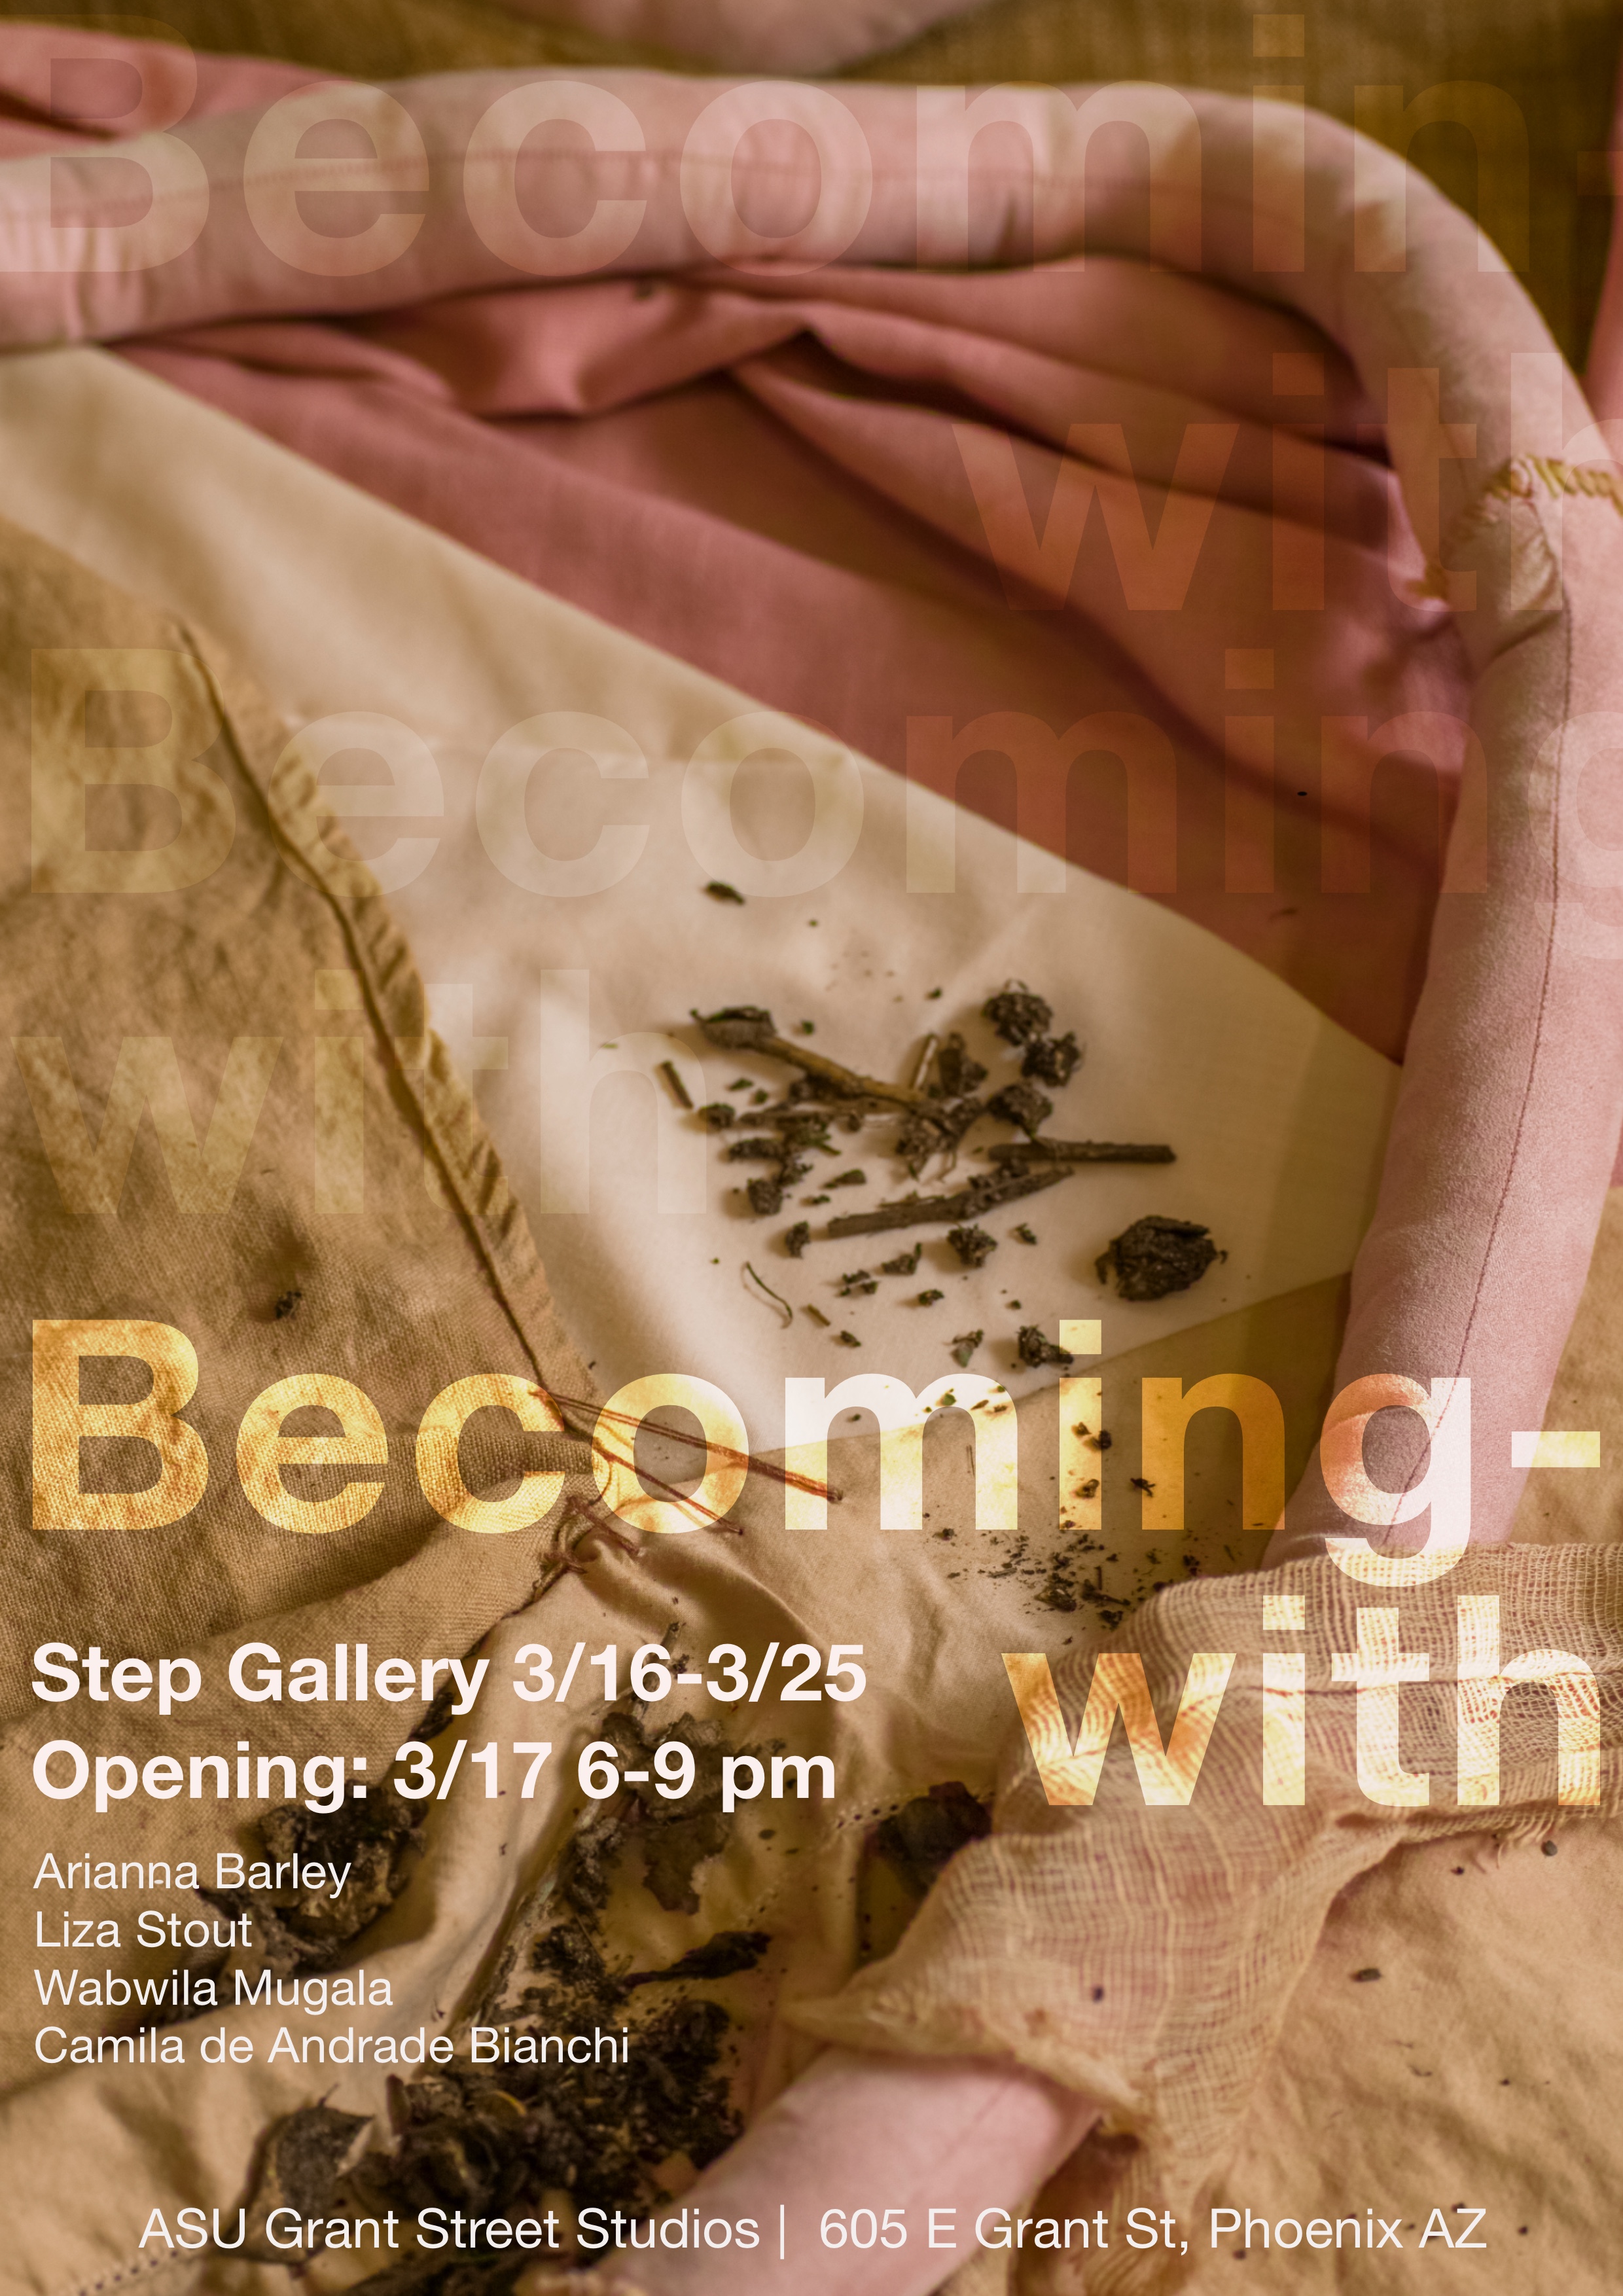 Promo image for MFA show "Becoming-with"